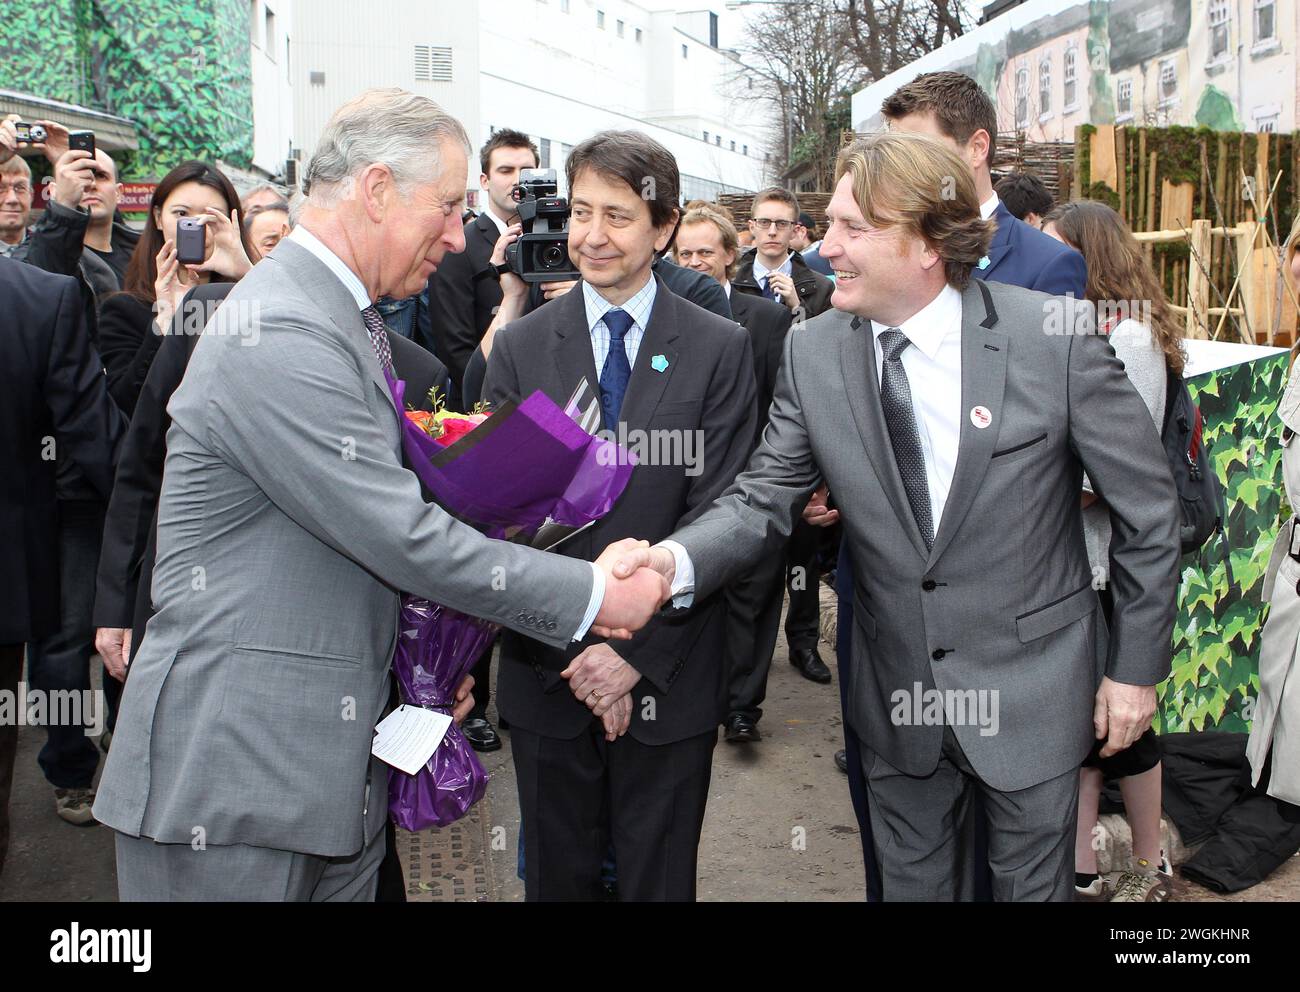 London, United States Of America. 16th Mar, 2012. 2012 ARCHIVE PHOTOS BREAKING NEWS - King Charles III, 75, has been diagnosed with cancer and will be avoiding public events after being advised by his doctors to minimize in-person contacts, Buckingham Palace announced Monday. People: King Charles III, David Domoney Credit: Storms Media Group/Alamy Live News Stock Photo